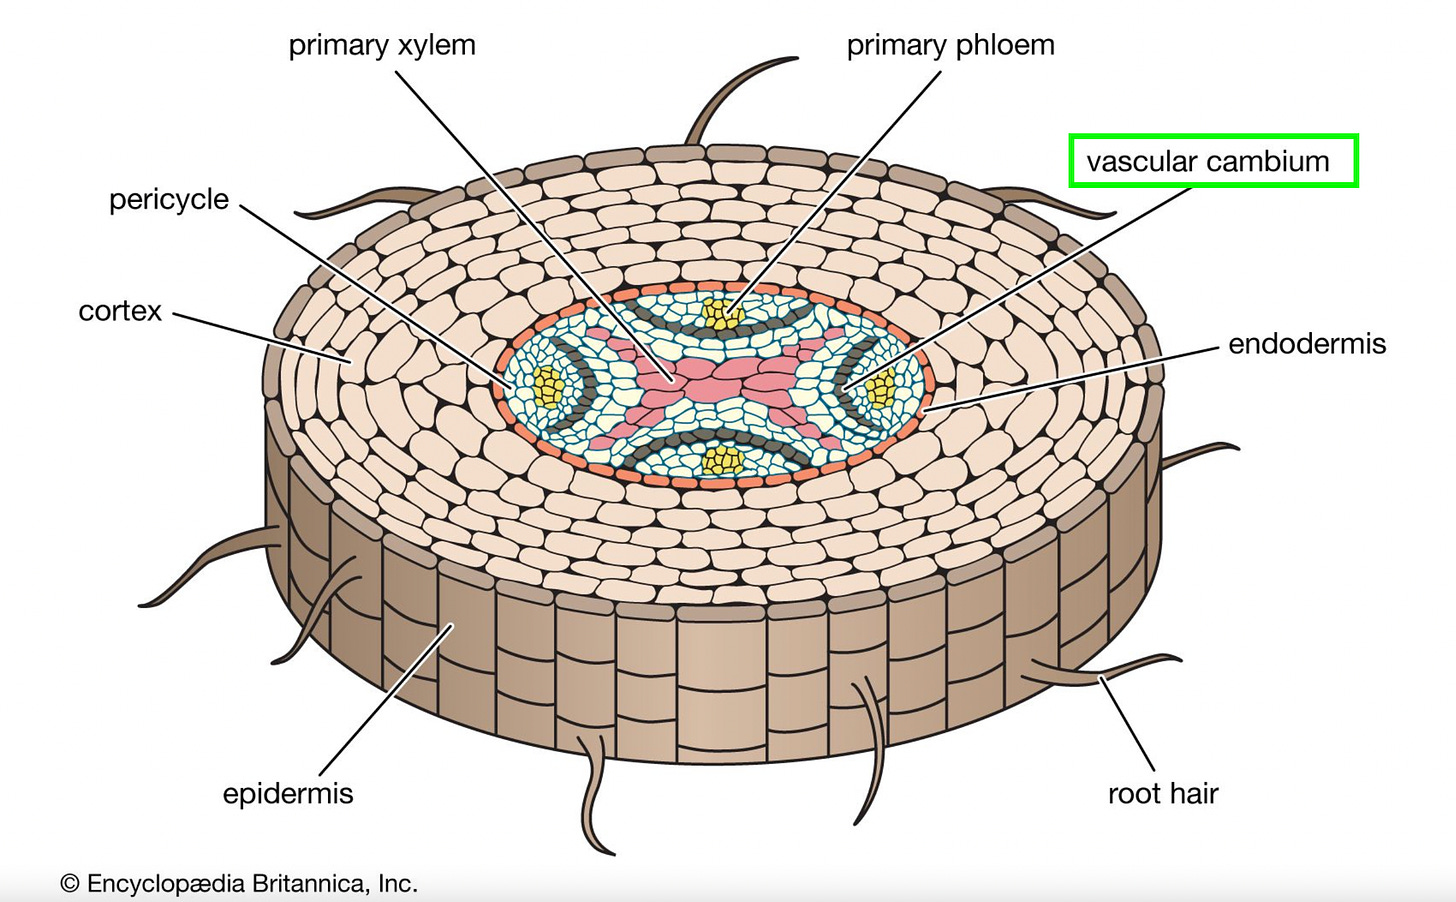 A diagram of a cross section of a tree limb. It appears as a series of concentric circles. From outside in, the layers are labeled as epidermis, cortex, endodermis, pericycle, primary phloem, cambium, primary xylem.